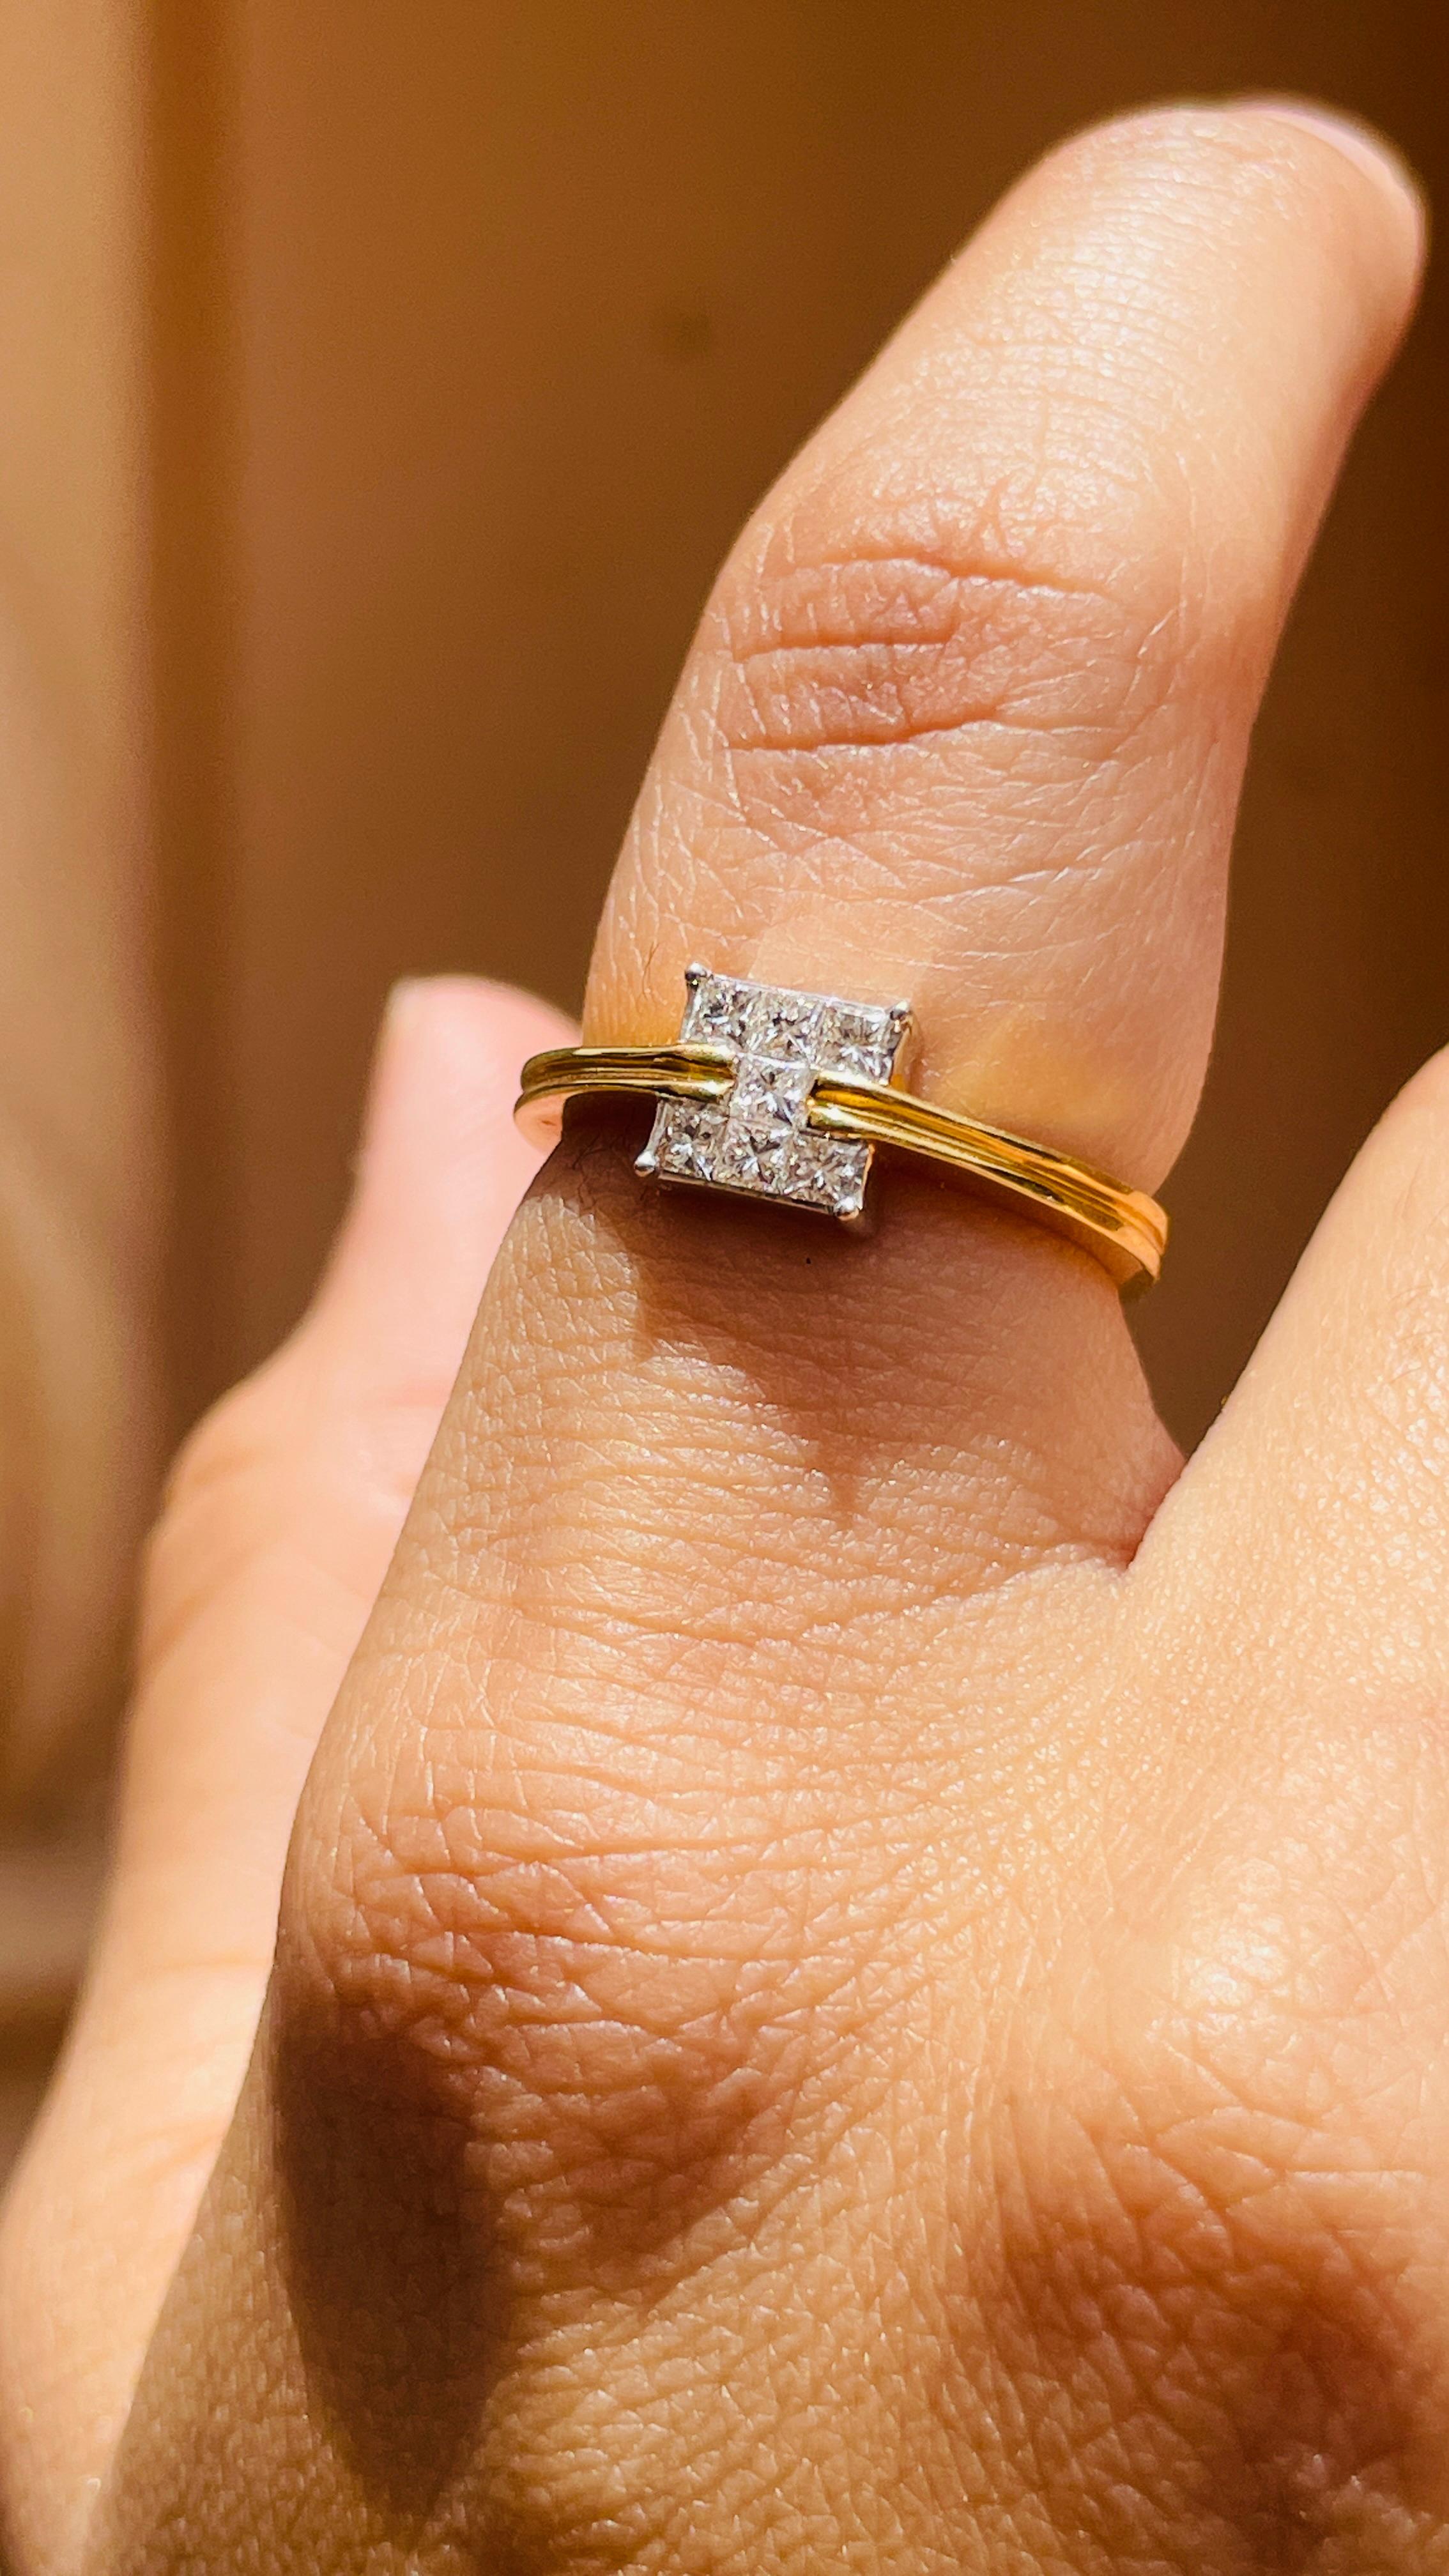 For Sale:  18k Solid Yellow Gold Square Diamond Ring Gift for Her 7